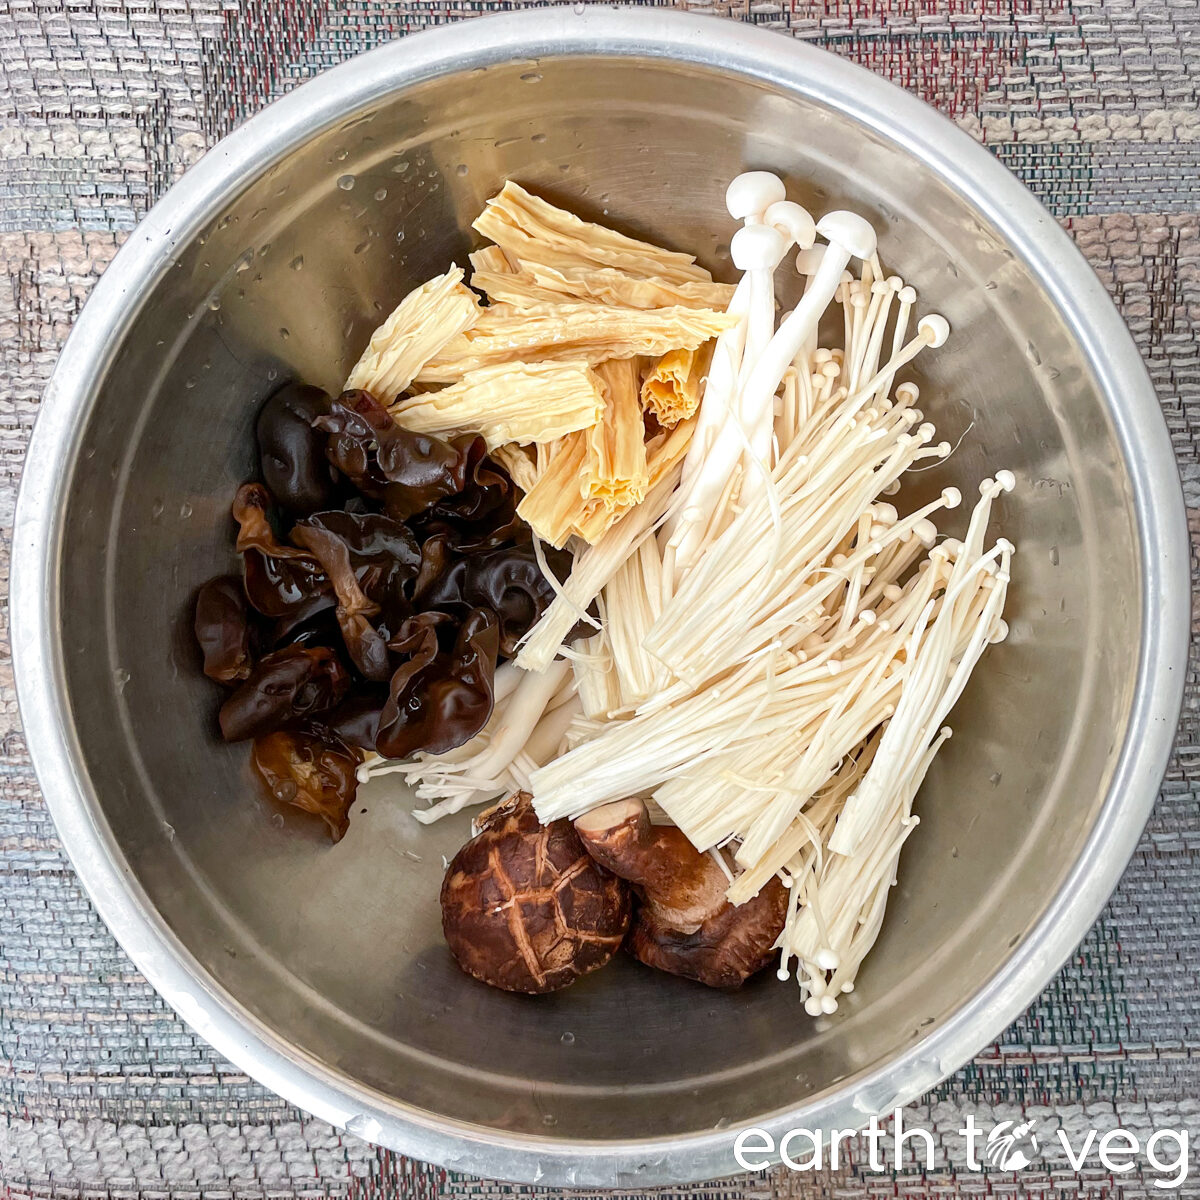 Mushrooms, fuzhu (beancurd sticks), and wood ear fungus in a stainless steel bowl.